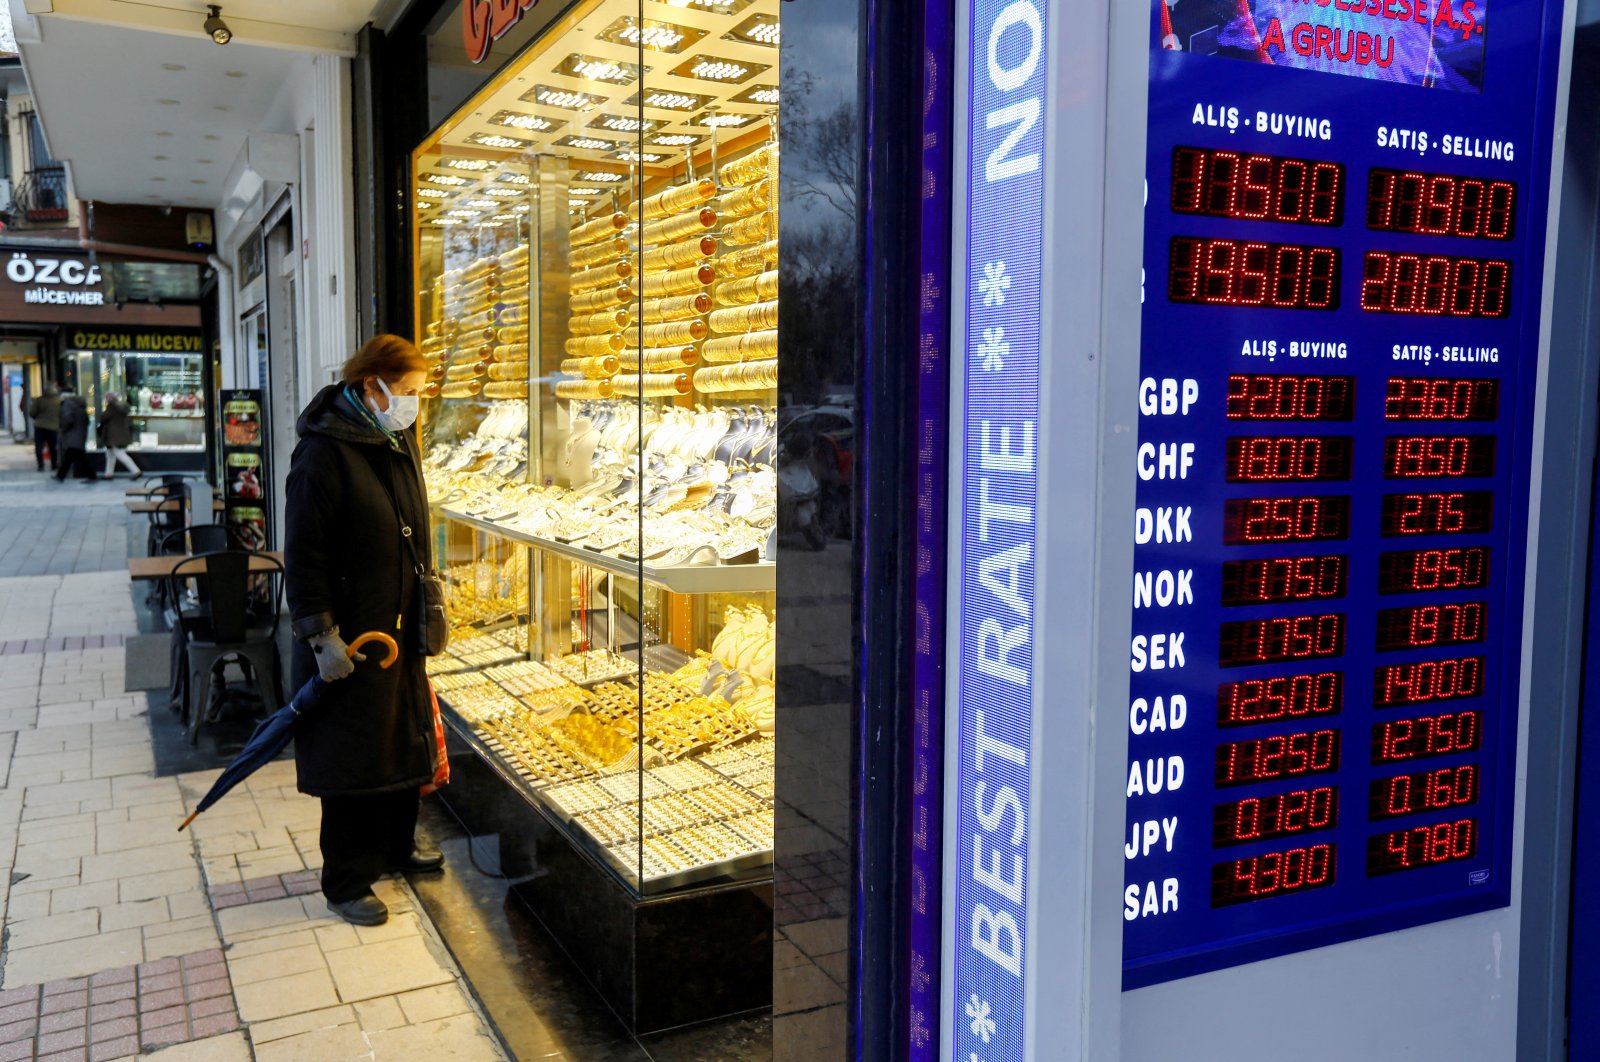 A woman looks at gold jewelry as she stands outside a jewelry shop in Istanbul, Turkey, Dec. 20, 2021. (Reuters Photo)